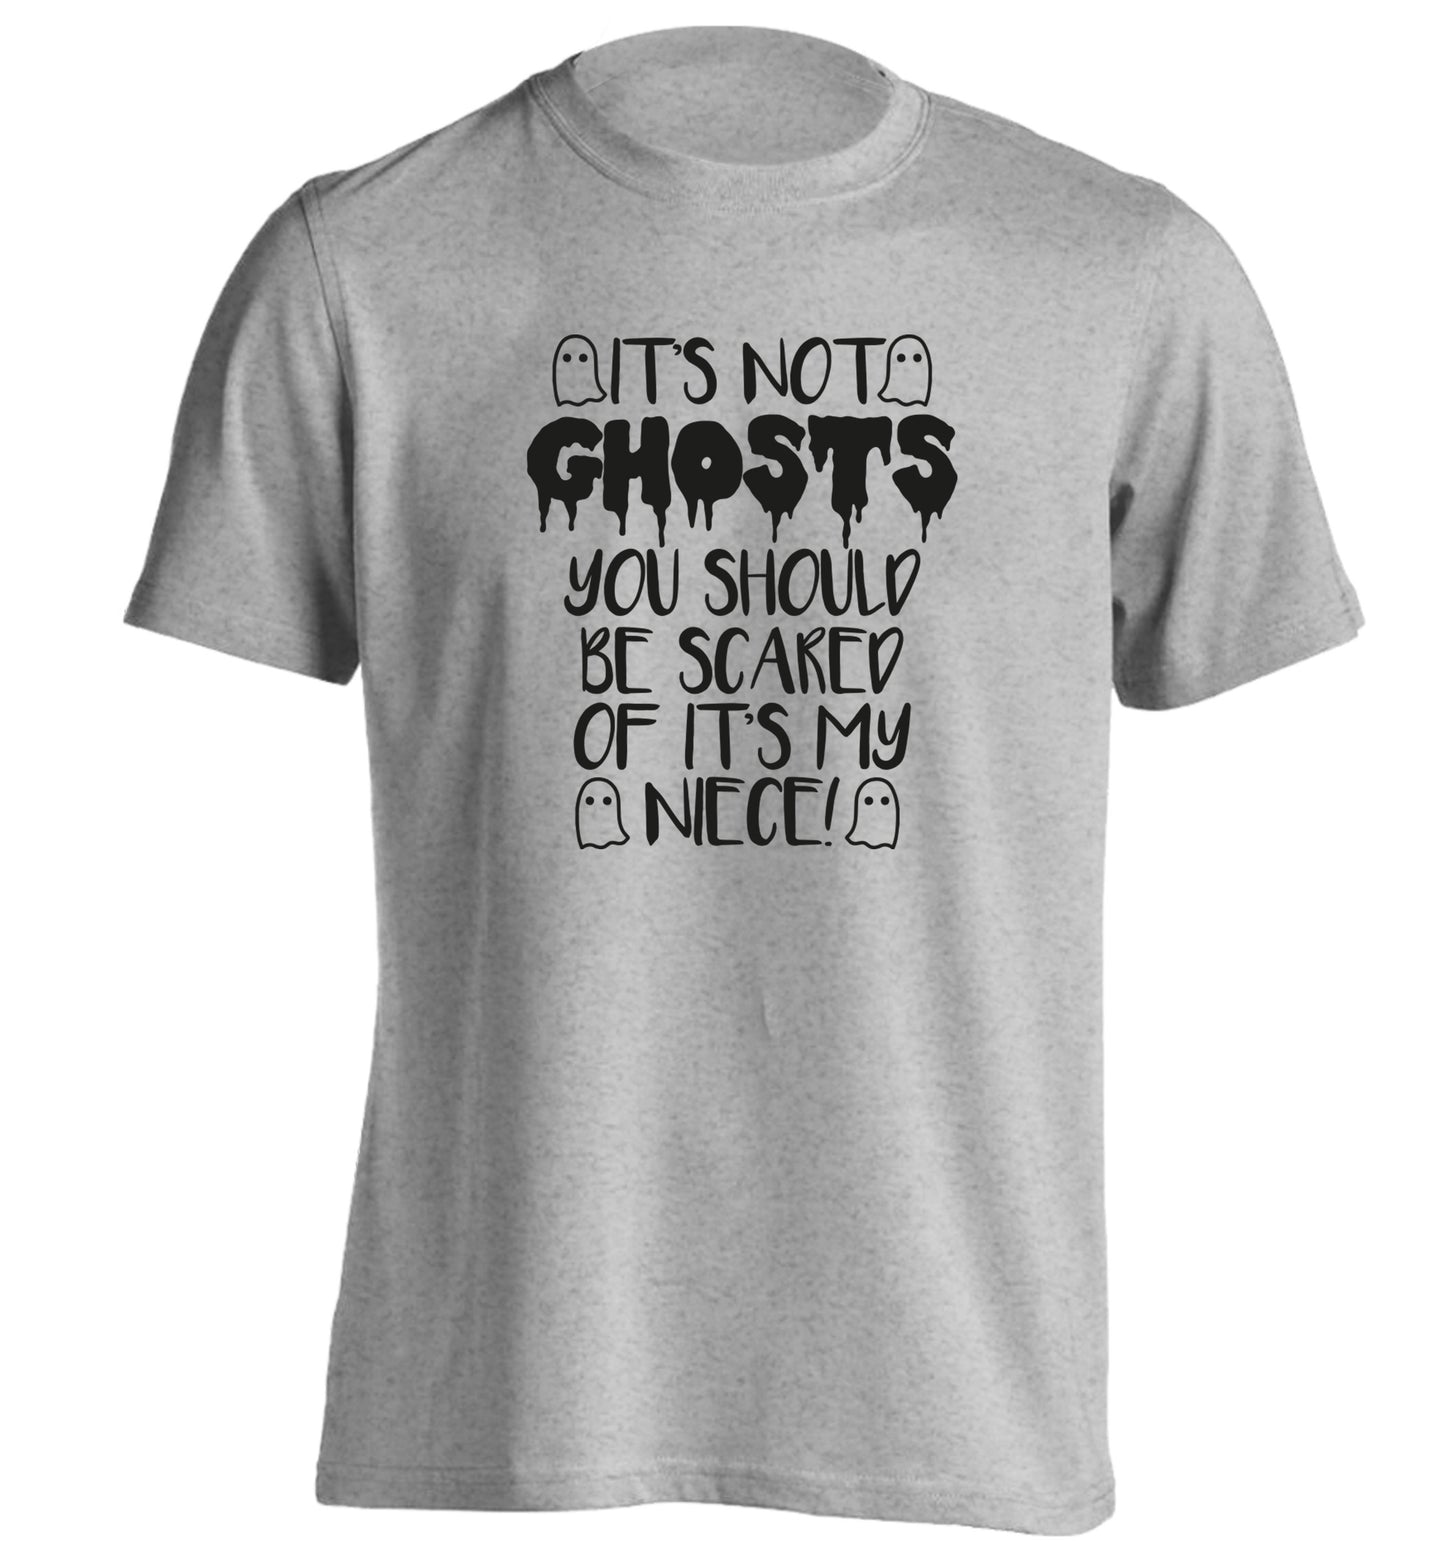 It's not ghosts you should be scared of it's my niece! adults unisex grey Tshirt 2XL